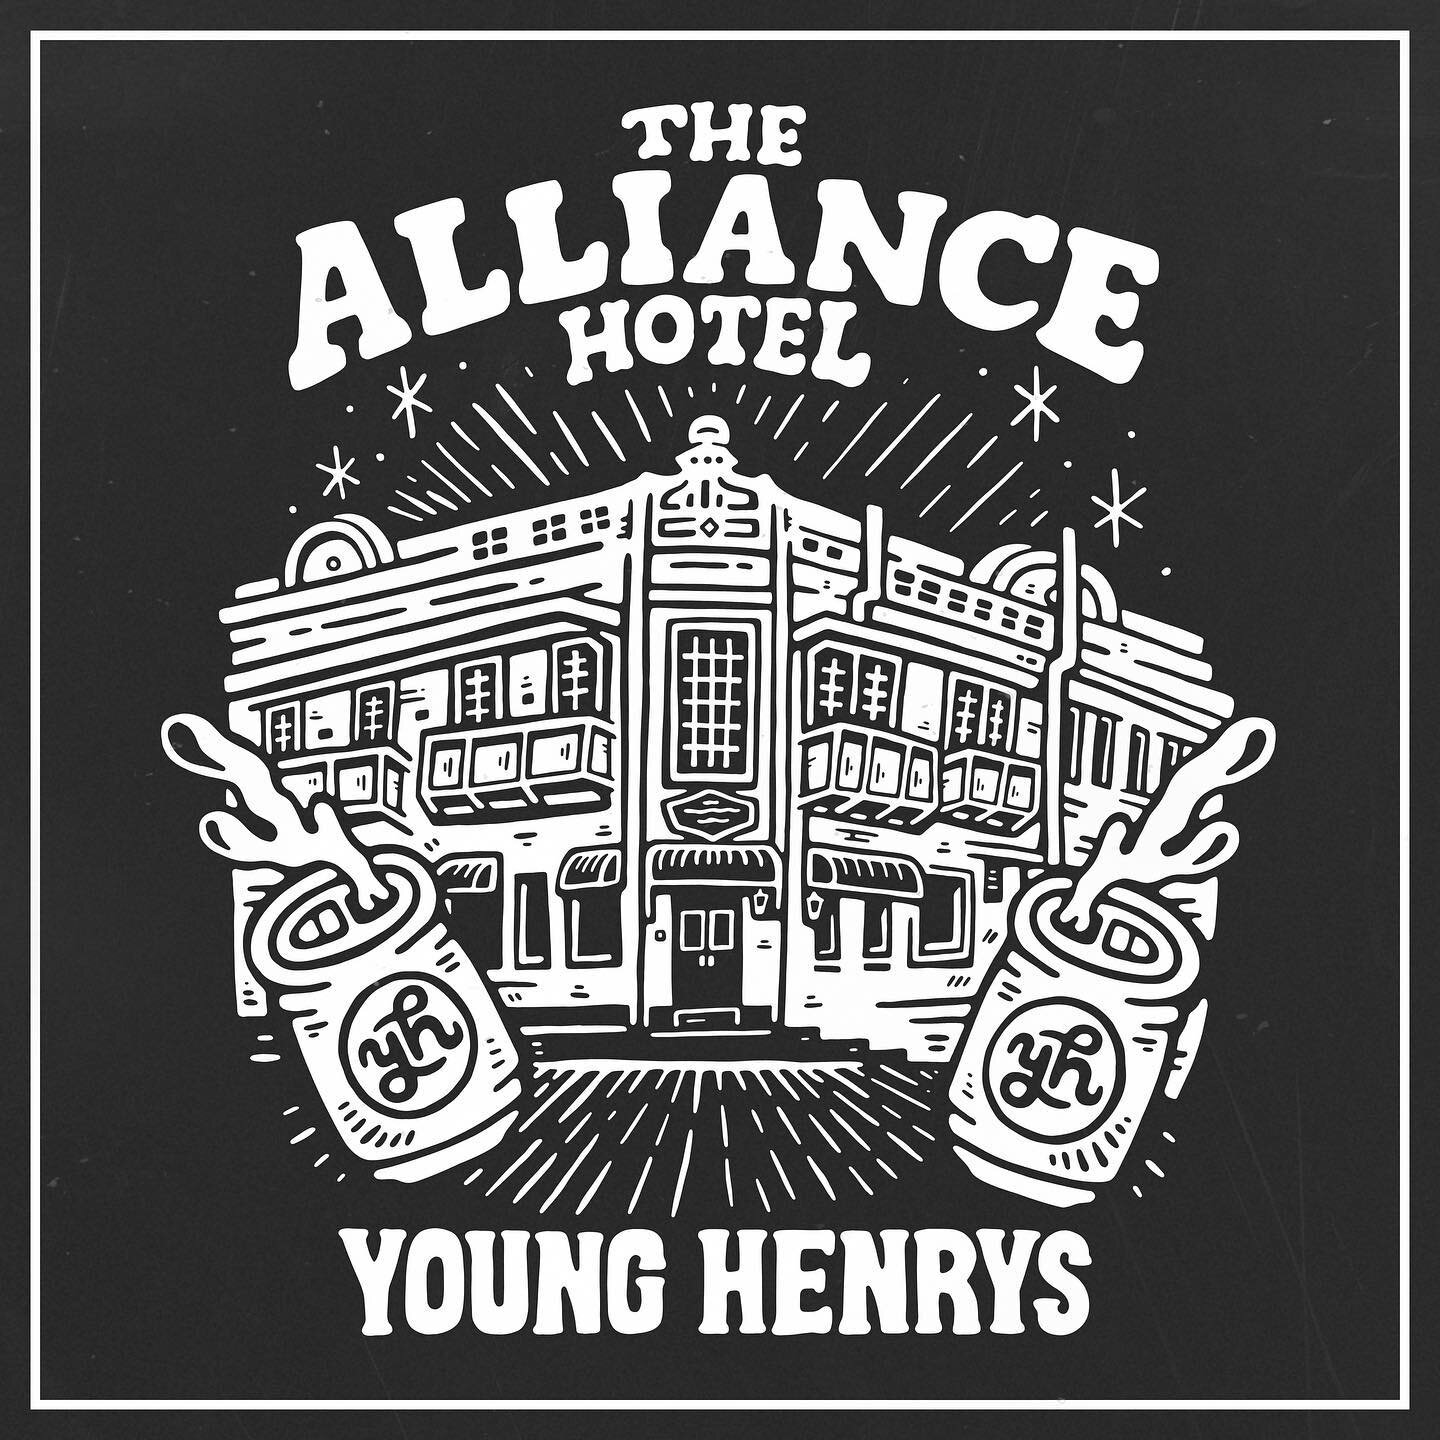 New shirt artwork for @thealliancehotel in Spring Hill, Brisbane. A collaboration with @younghenrys. If you want one, go in for a beer and ask behind the bar.

I love drawing old pubs and building, this one was fun with the classic balconies and alca